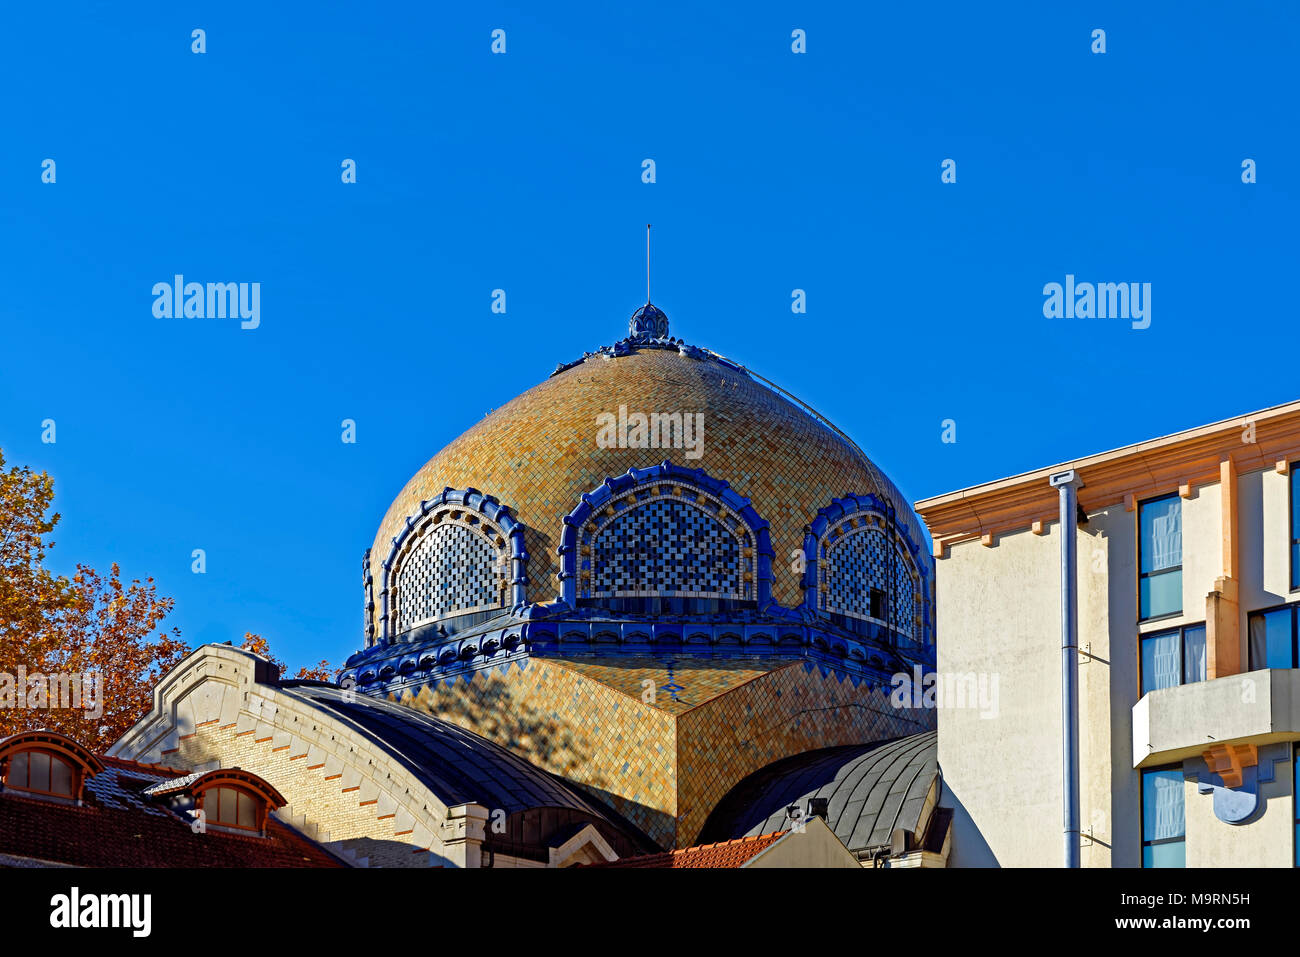 Europe, France, Auvergne, Vichy, avenue Thermale, dome, building, Therme, architecture, detail, building, roofs, historically, health, place of intere Stock Photo